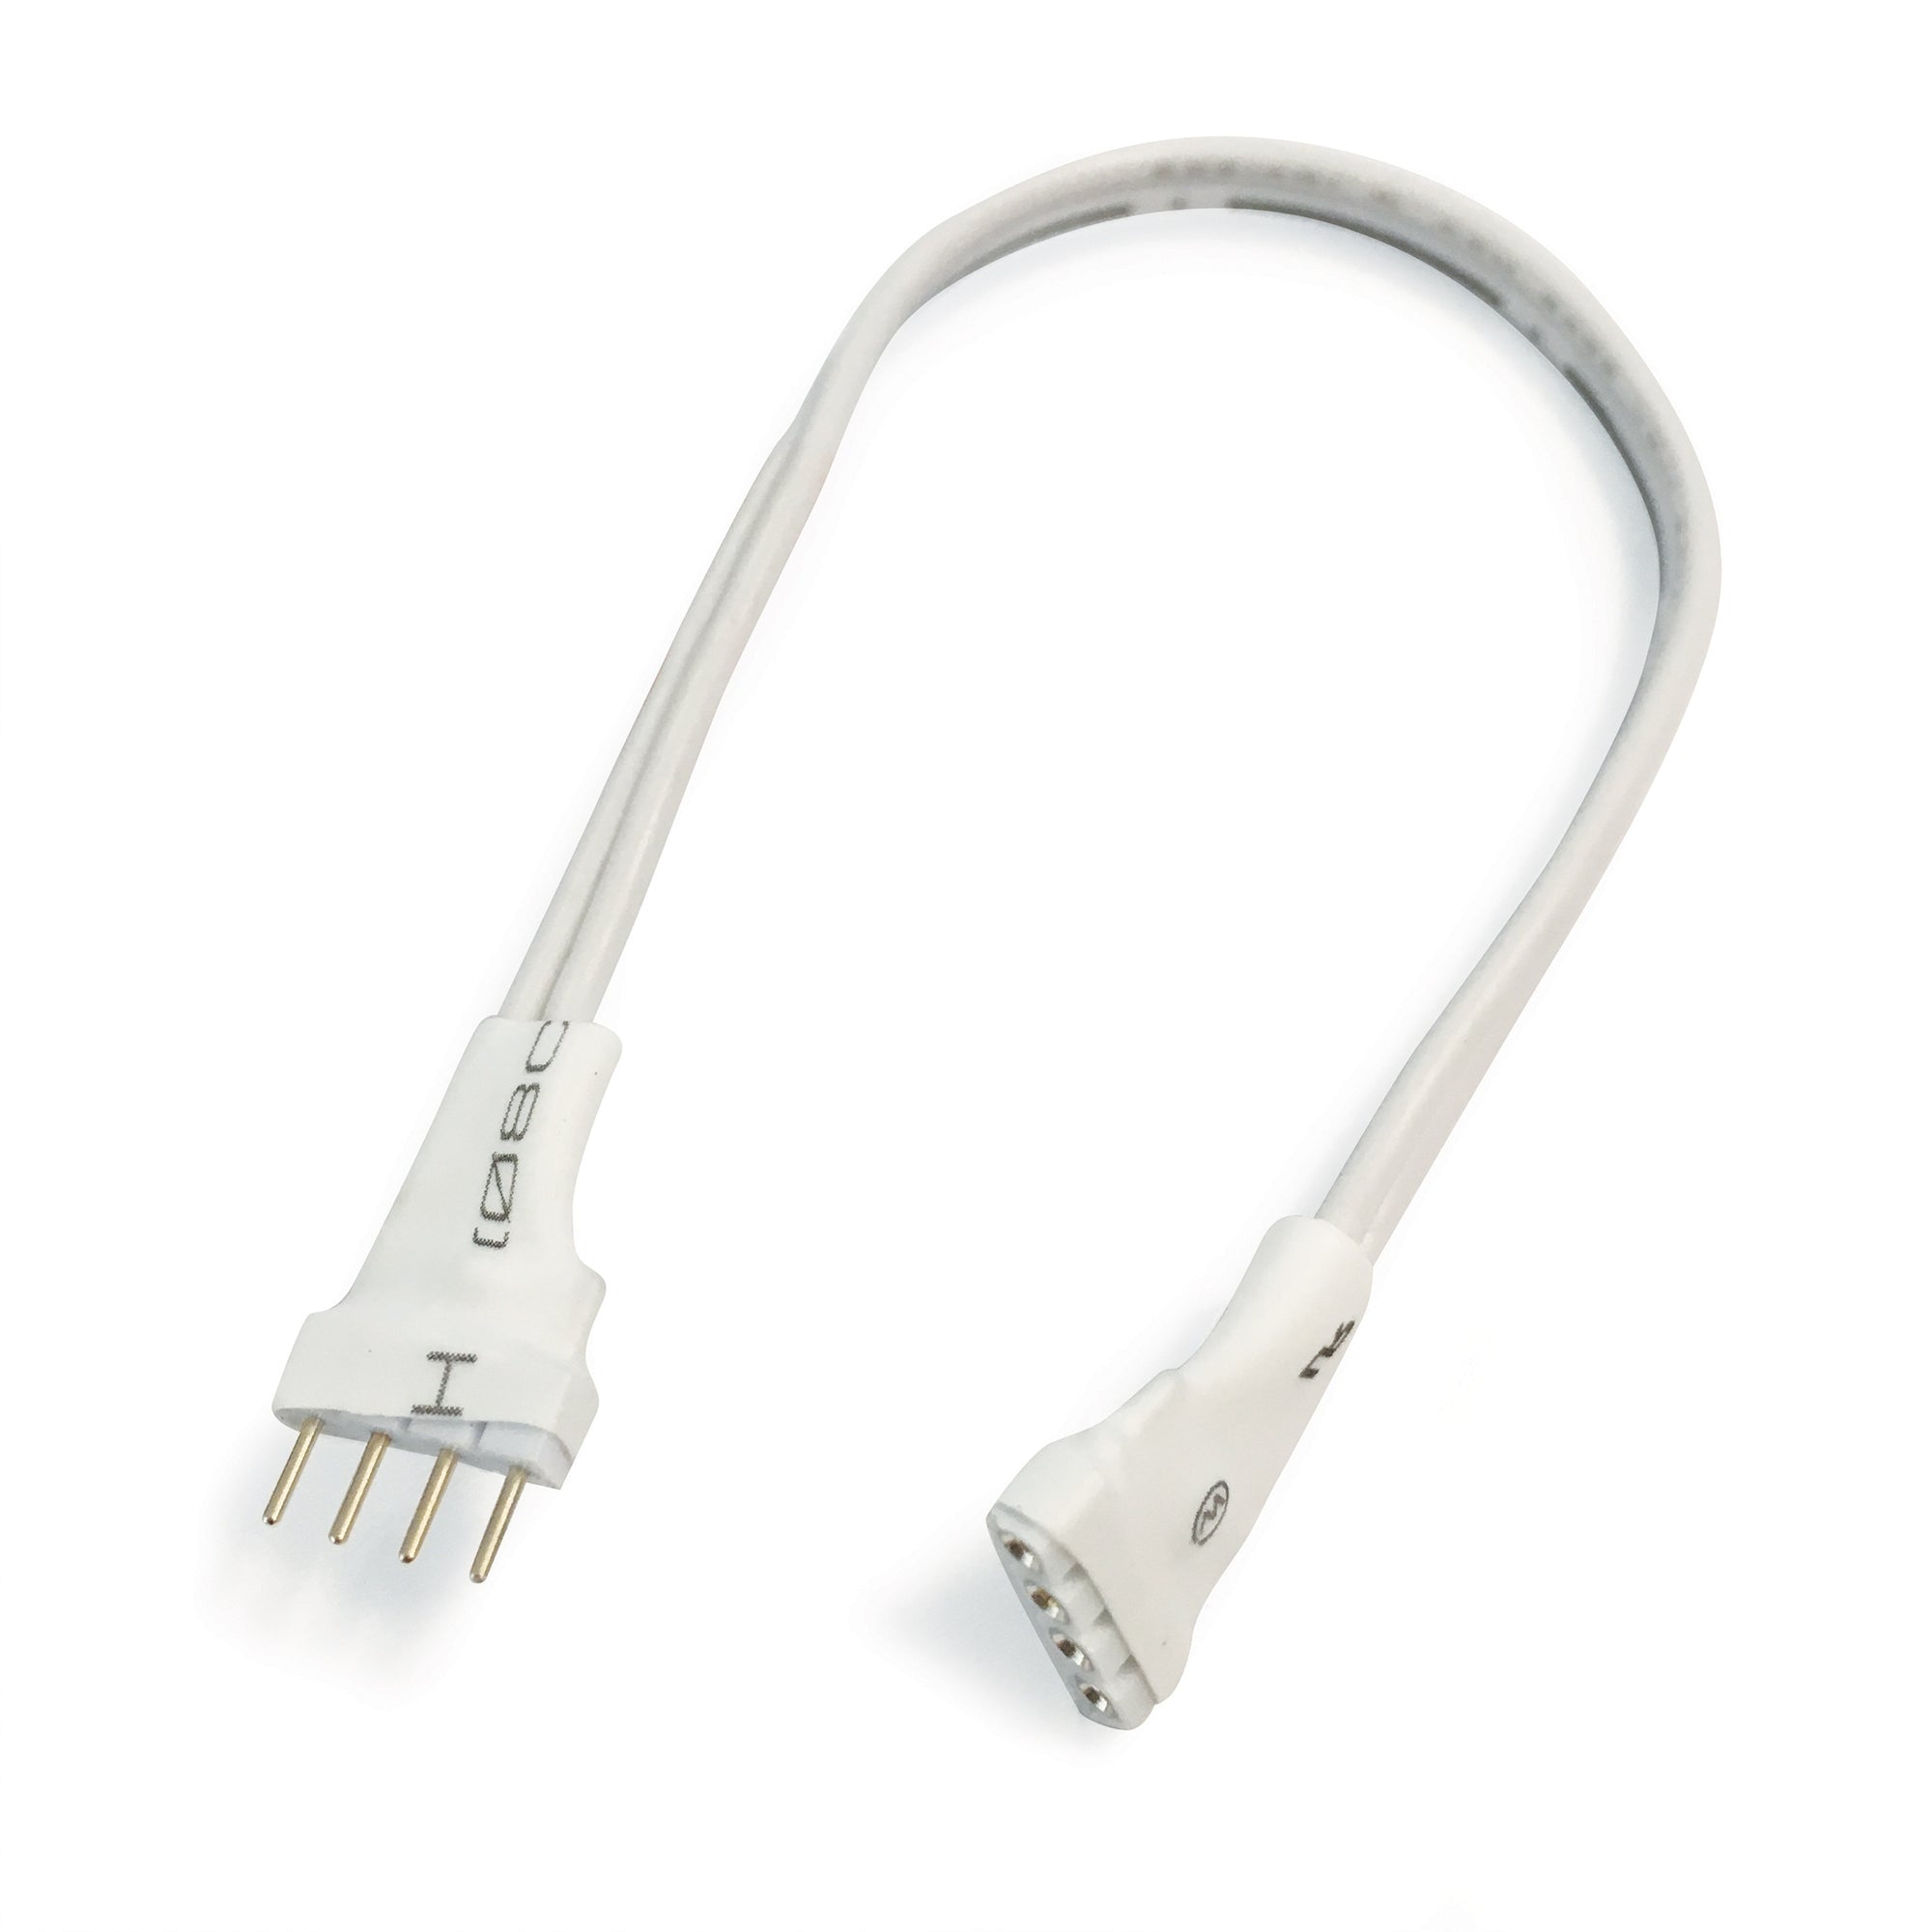 Nora Lighting NARGBW-902W - Accent / Undercabinet - 2 Inch Interconnection Cable for RGBW Tape Light